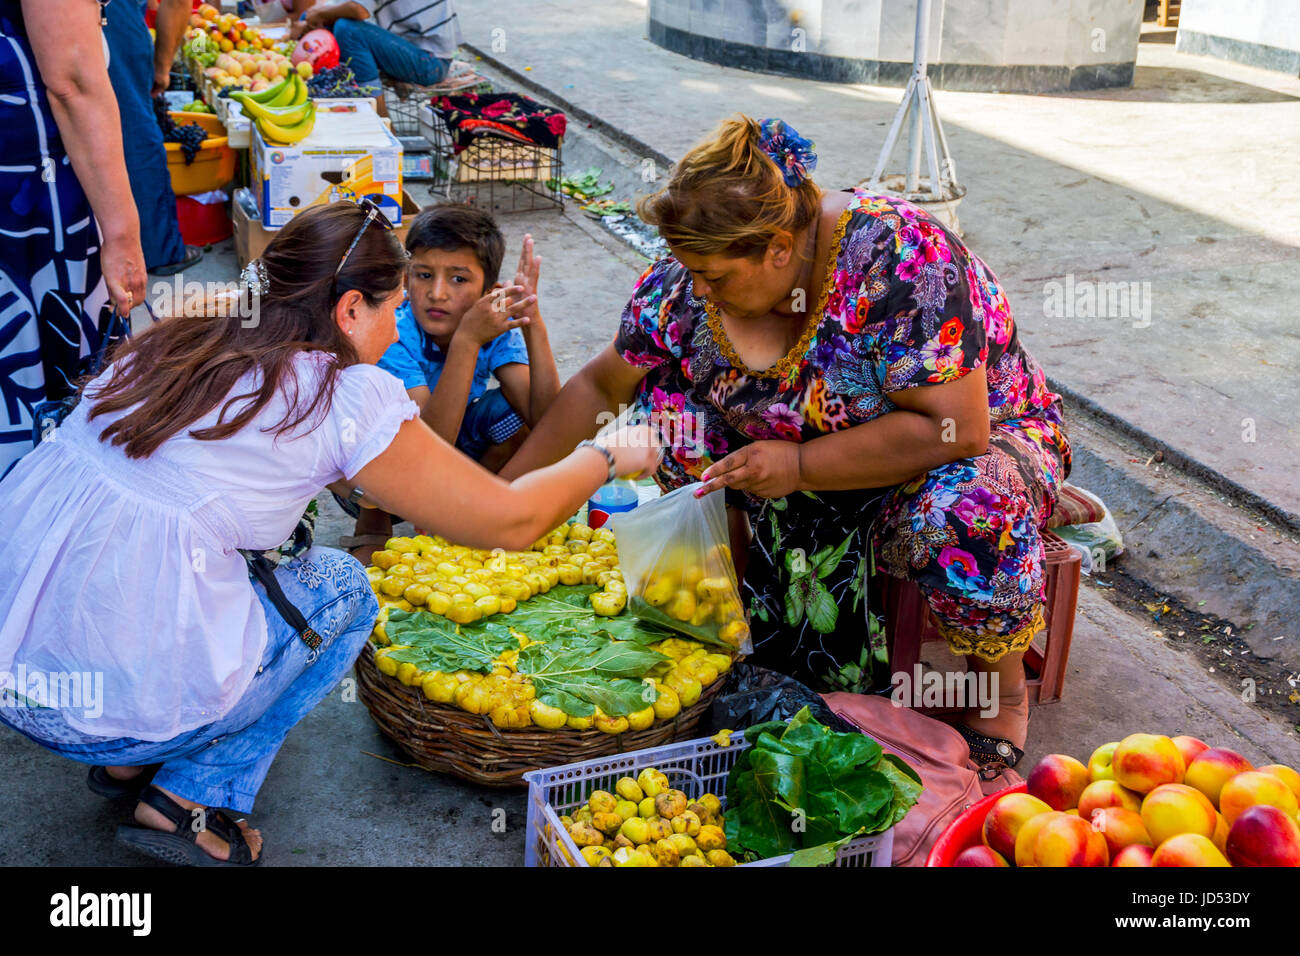 SAMARKAND, UZBEKISTAN - AUGUST 28: Woman picking ripe yellow figs out of the basket at Siab bazaar, local market in Samarkand. August 2016 Stock Photo